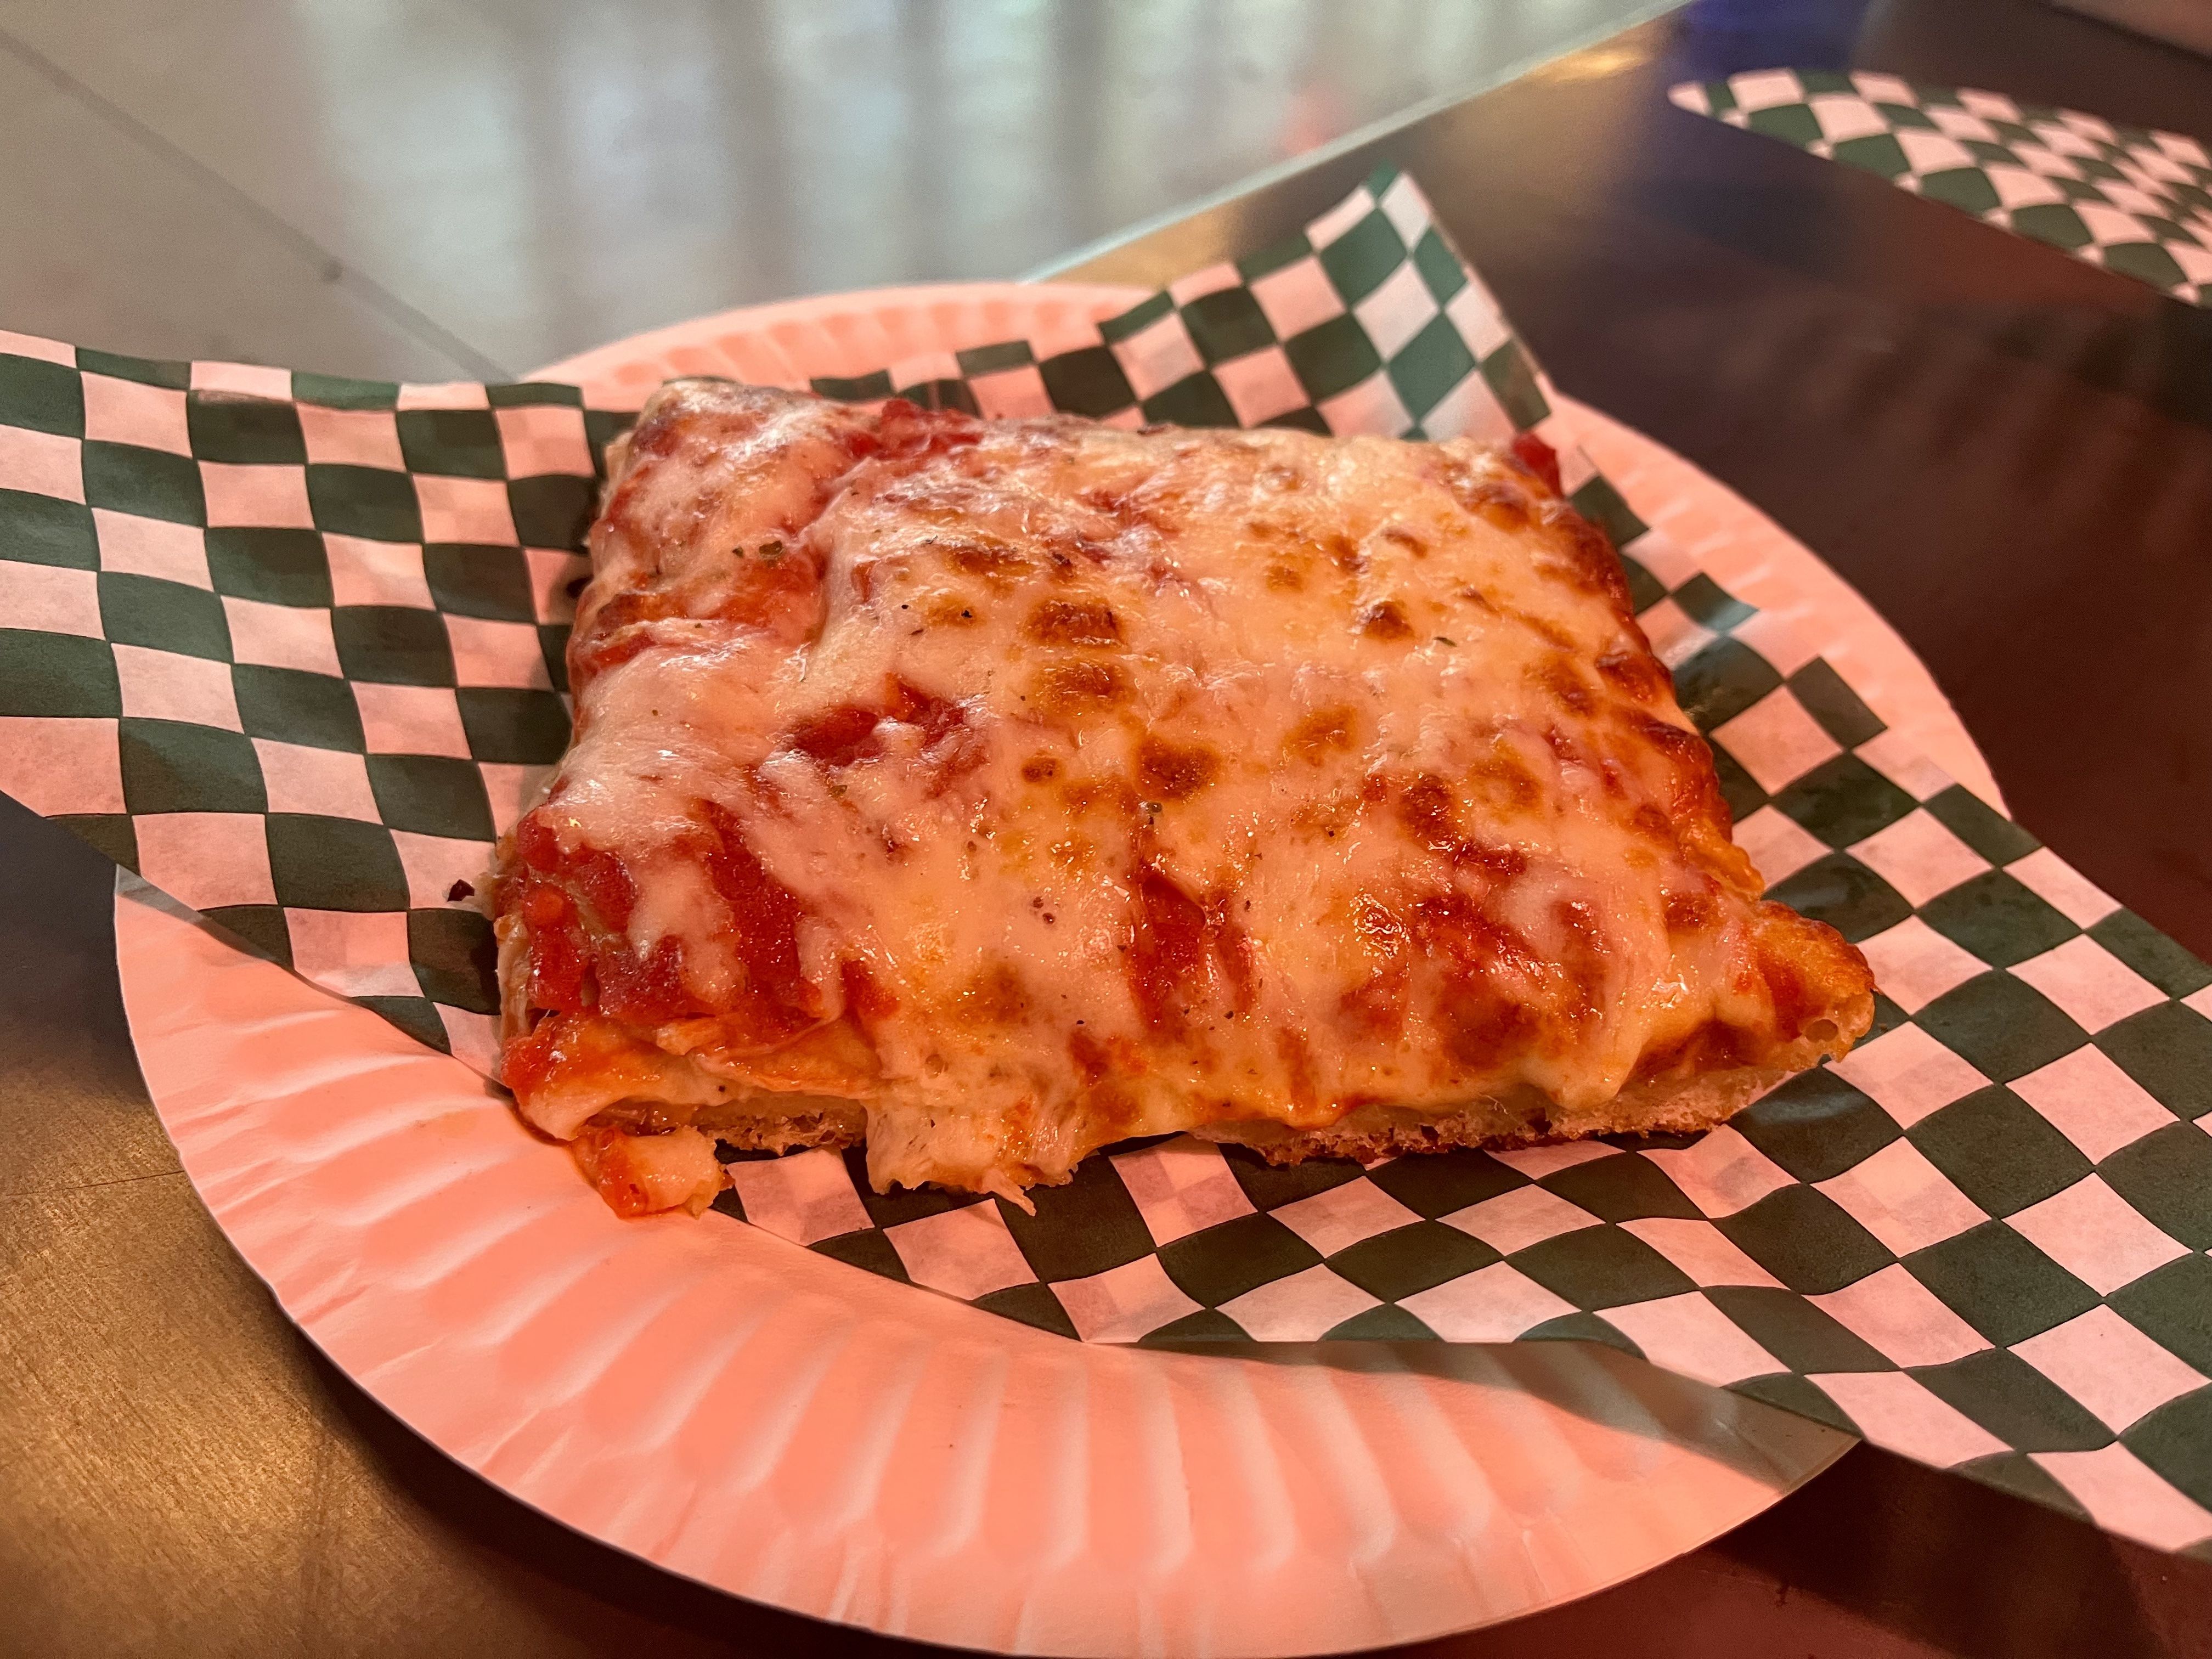 A slice of pizza.